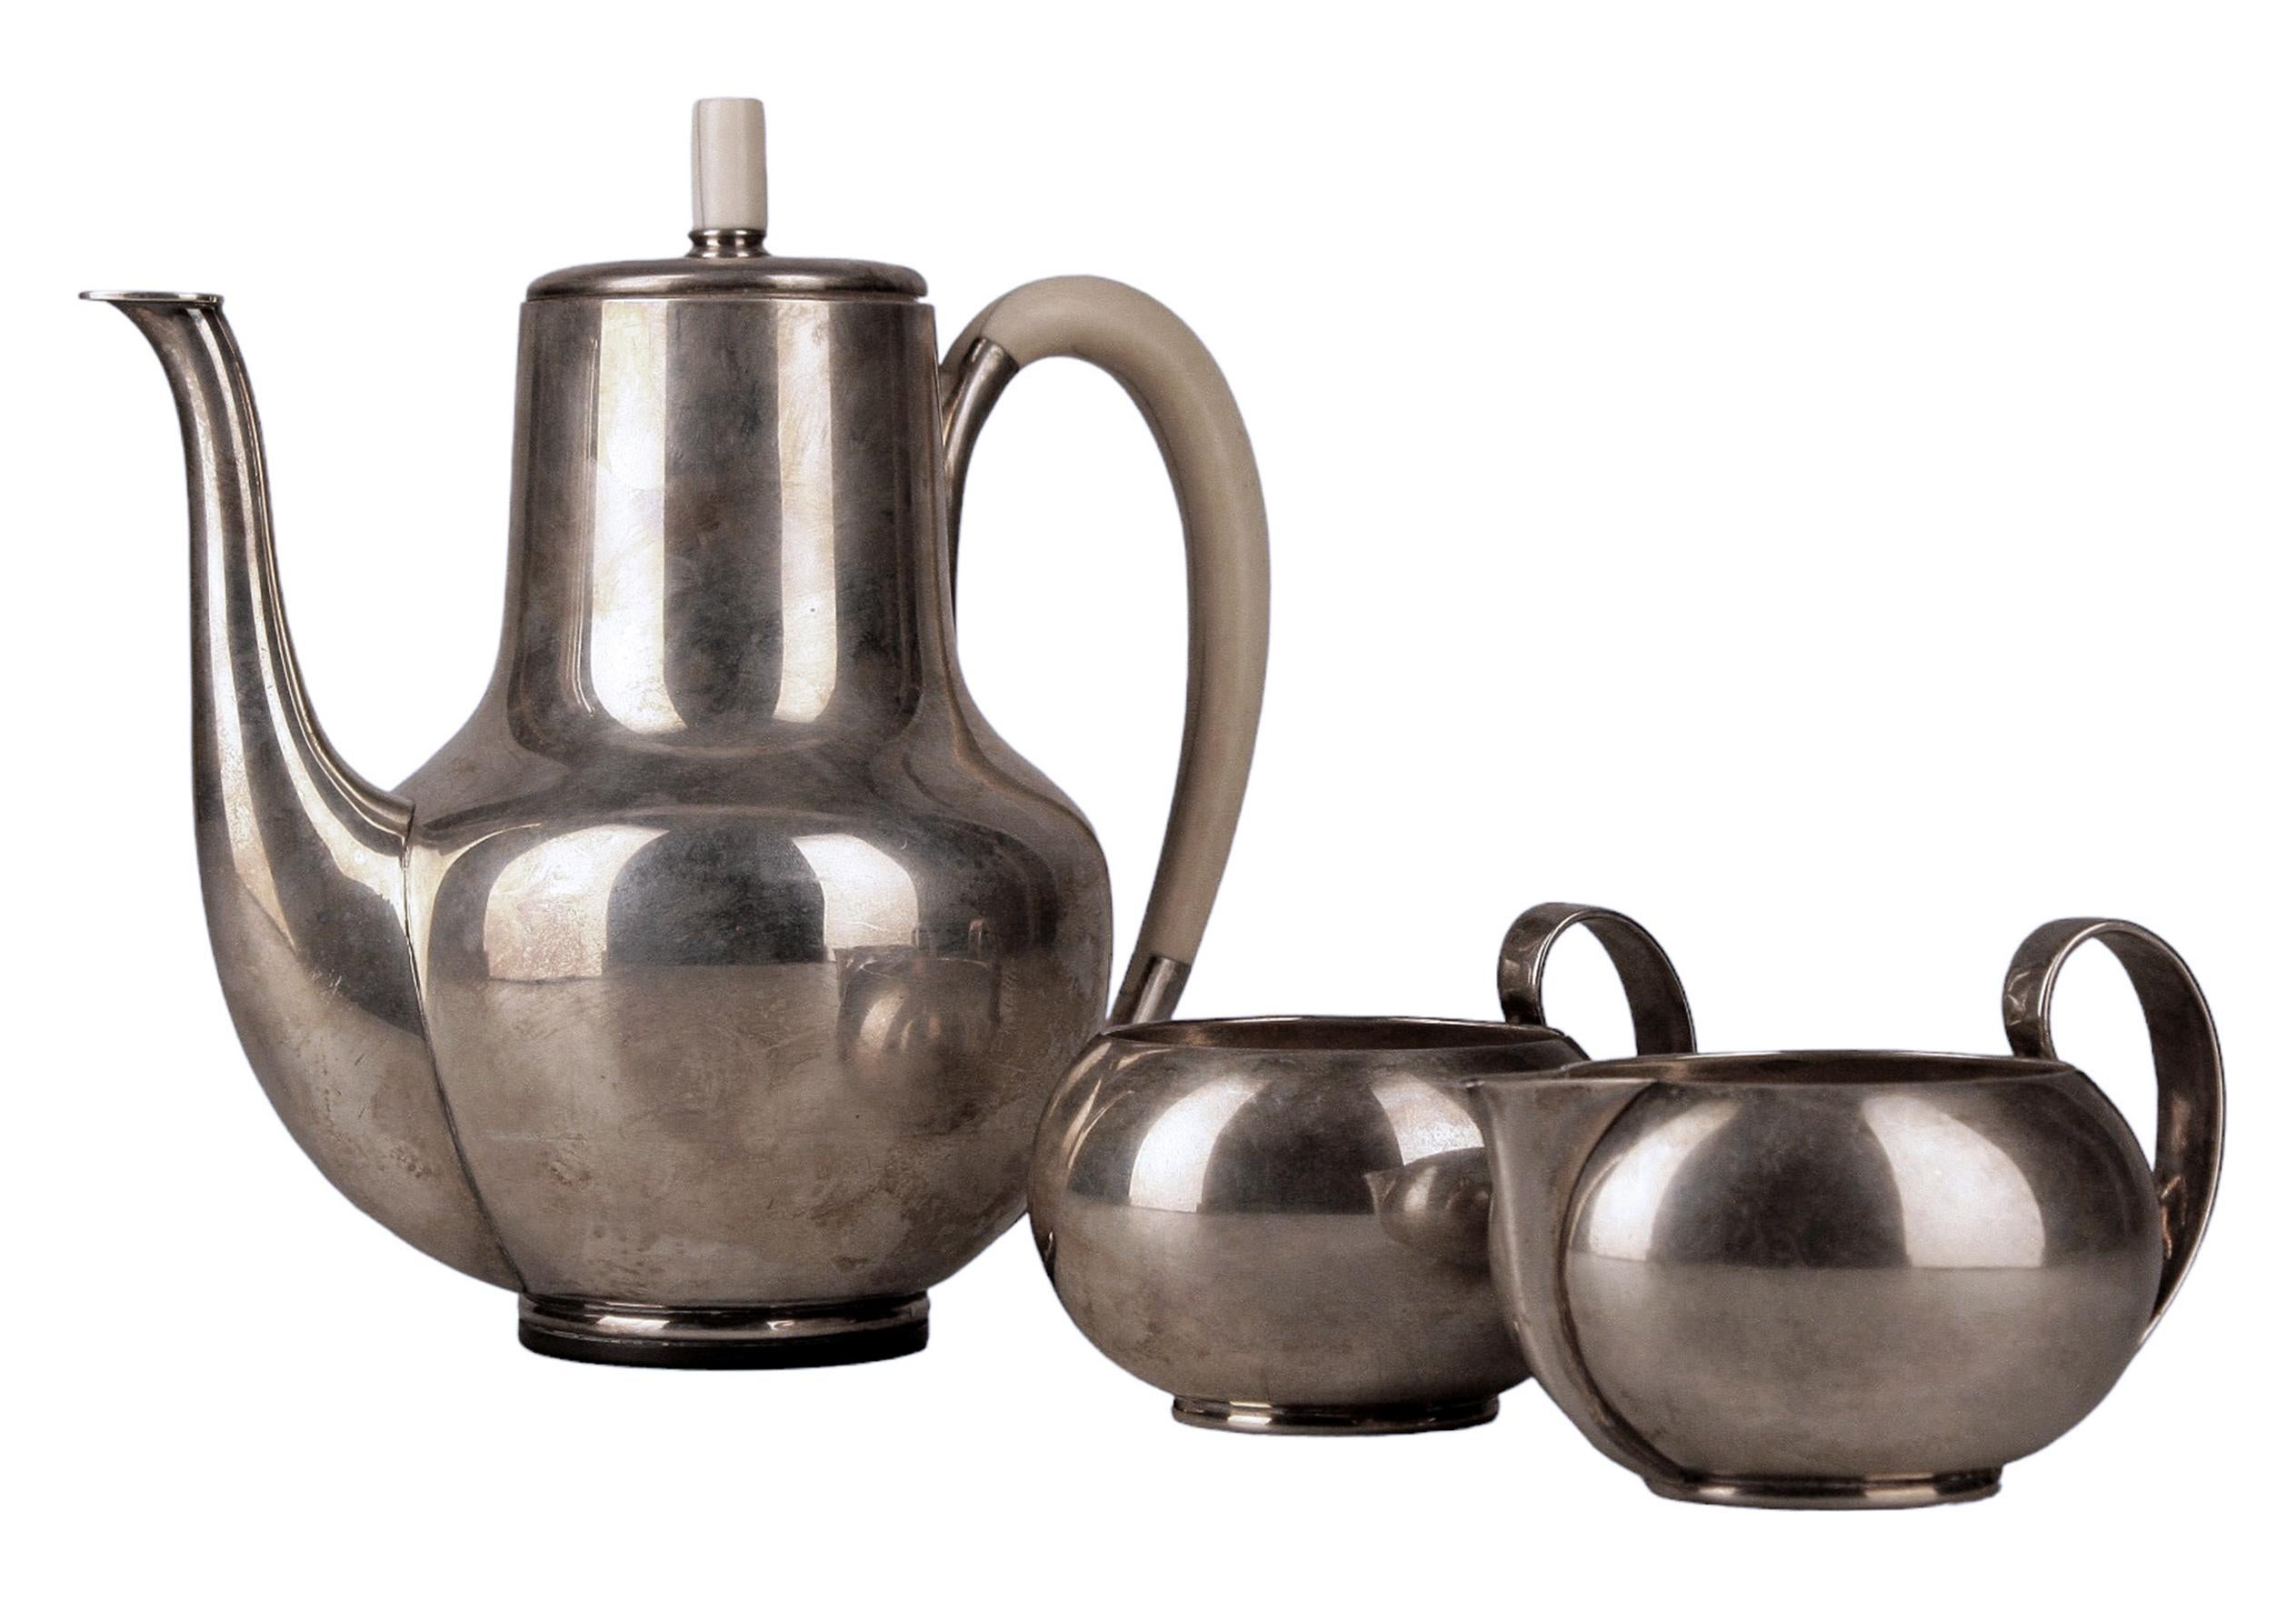 1930s Jugendstil sterling silver 3-pieces coffee and tea set: kettle/pot, creamer and sugar bowl designed by Svend Weihrauch for Frantz Hingelberg, Denmark

By: Frantz Hingelberg, Svend Weihrauch
Material: silver, sterling silver, metal,